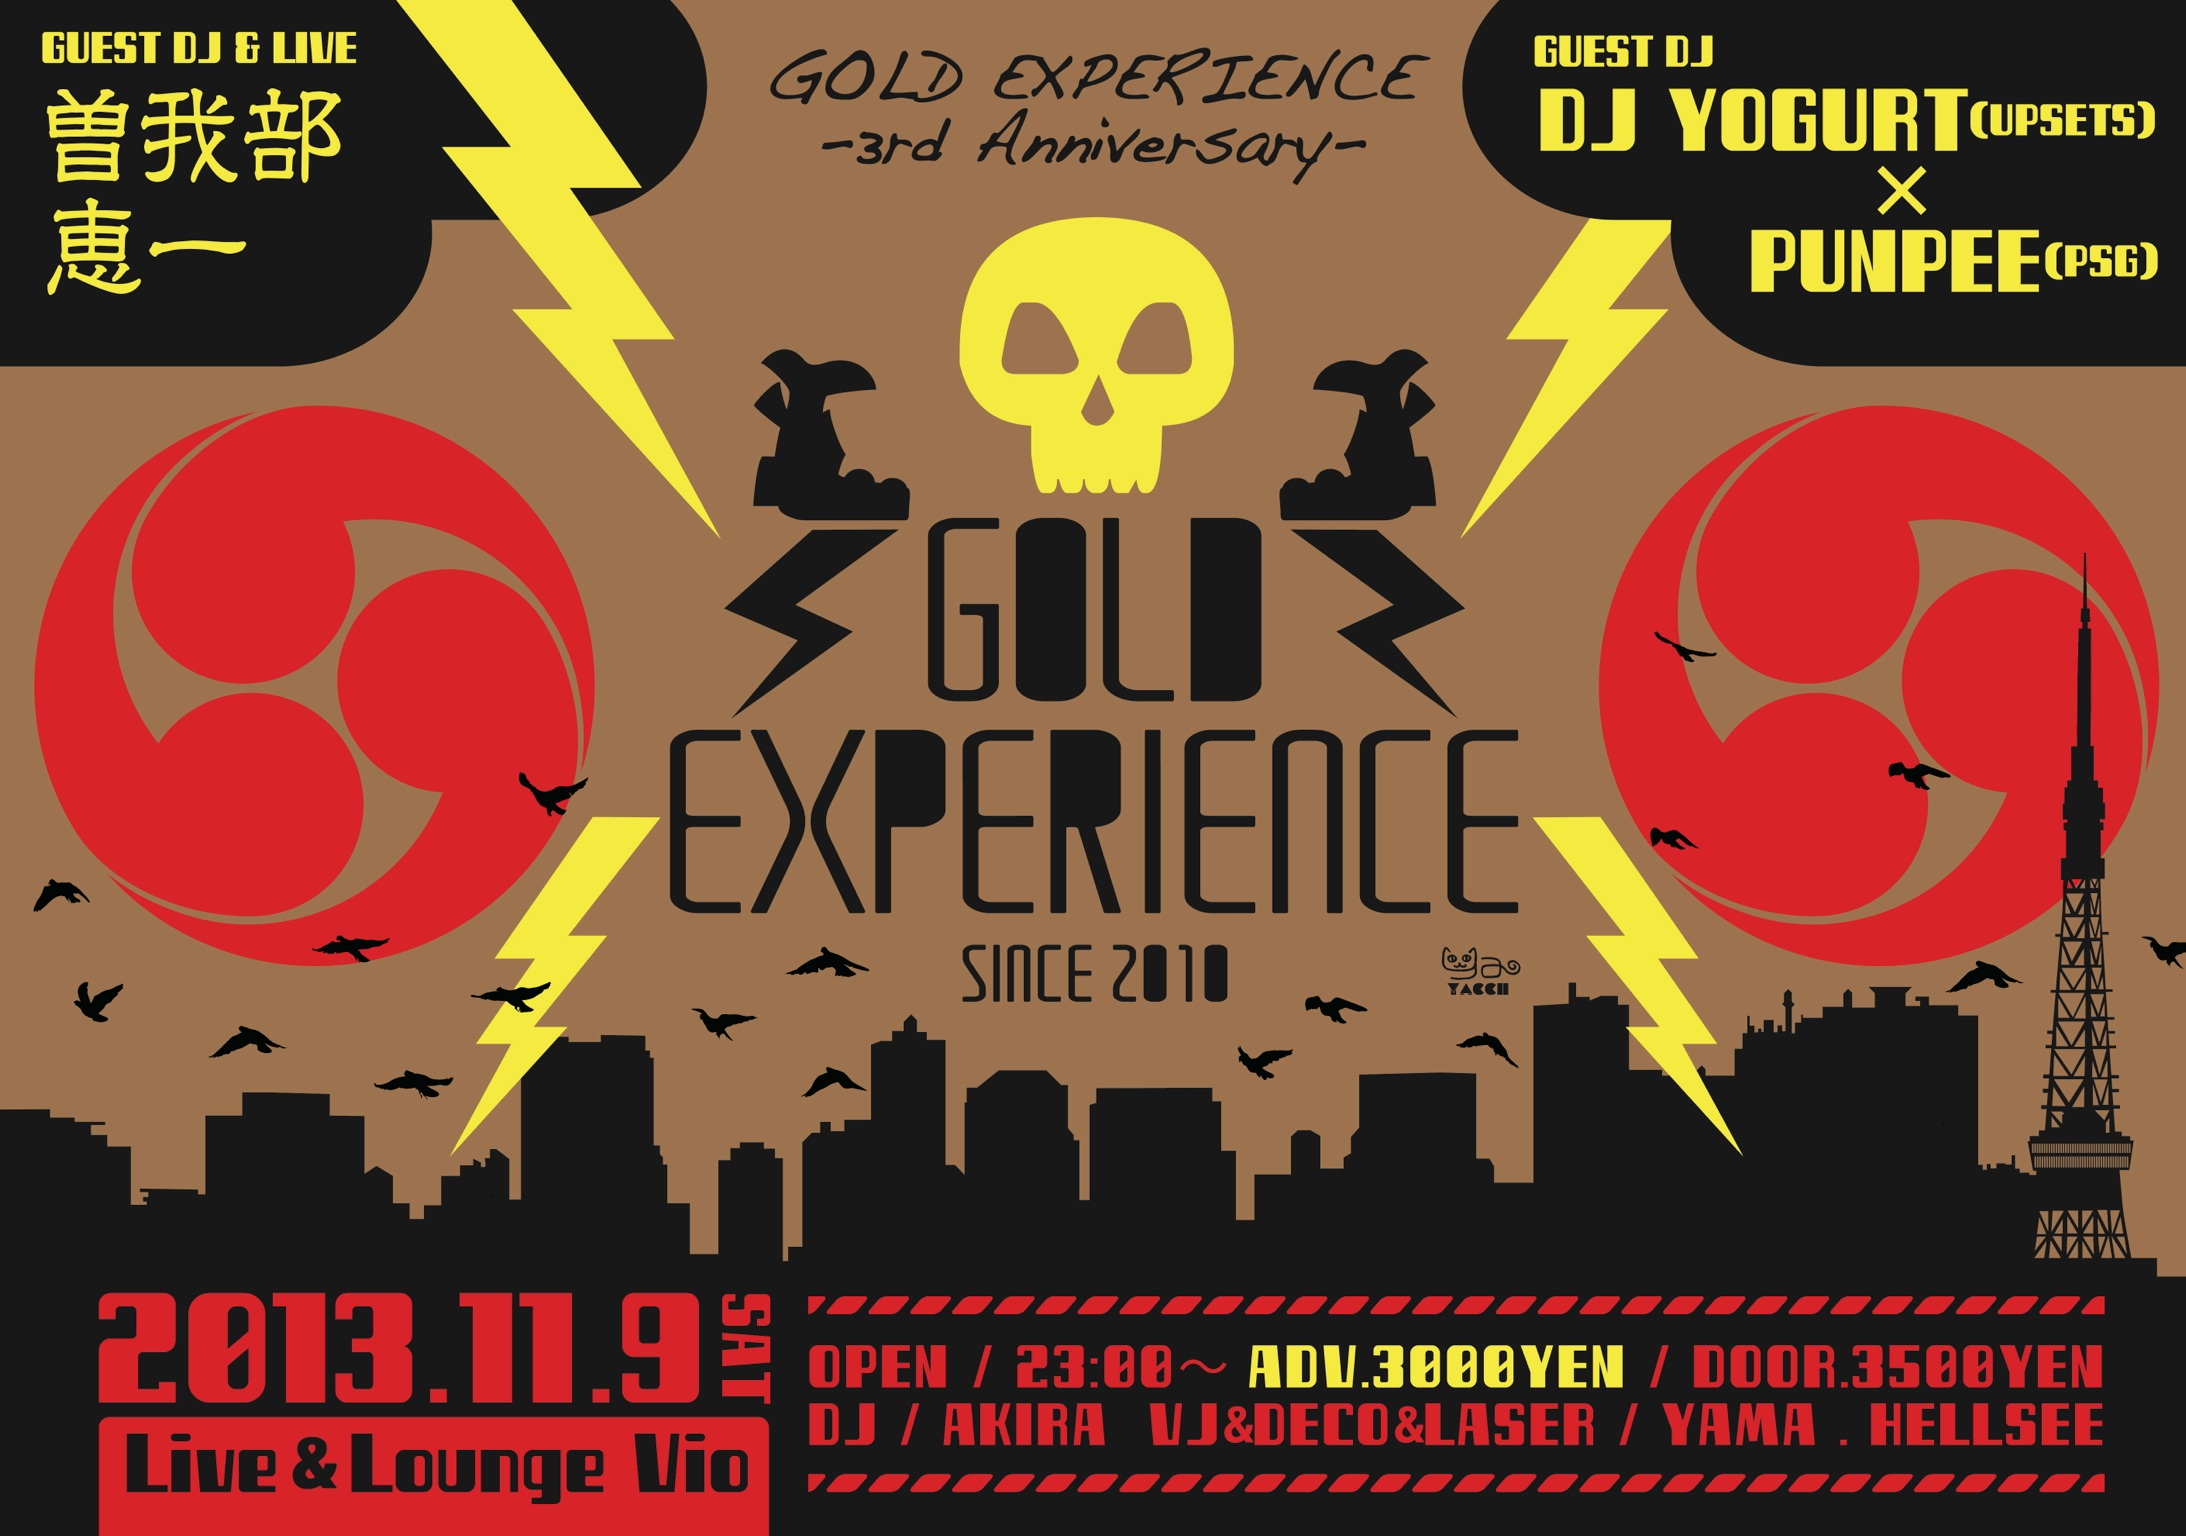 ＜GOLD EXPERIENCE -3rd Anniversary-＞ @愛知 名古屋 Live & Lounge Vio